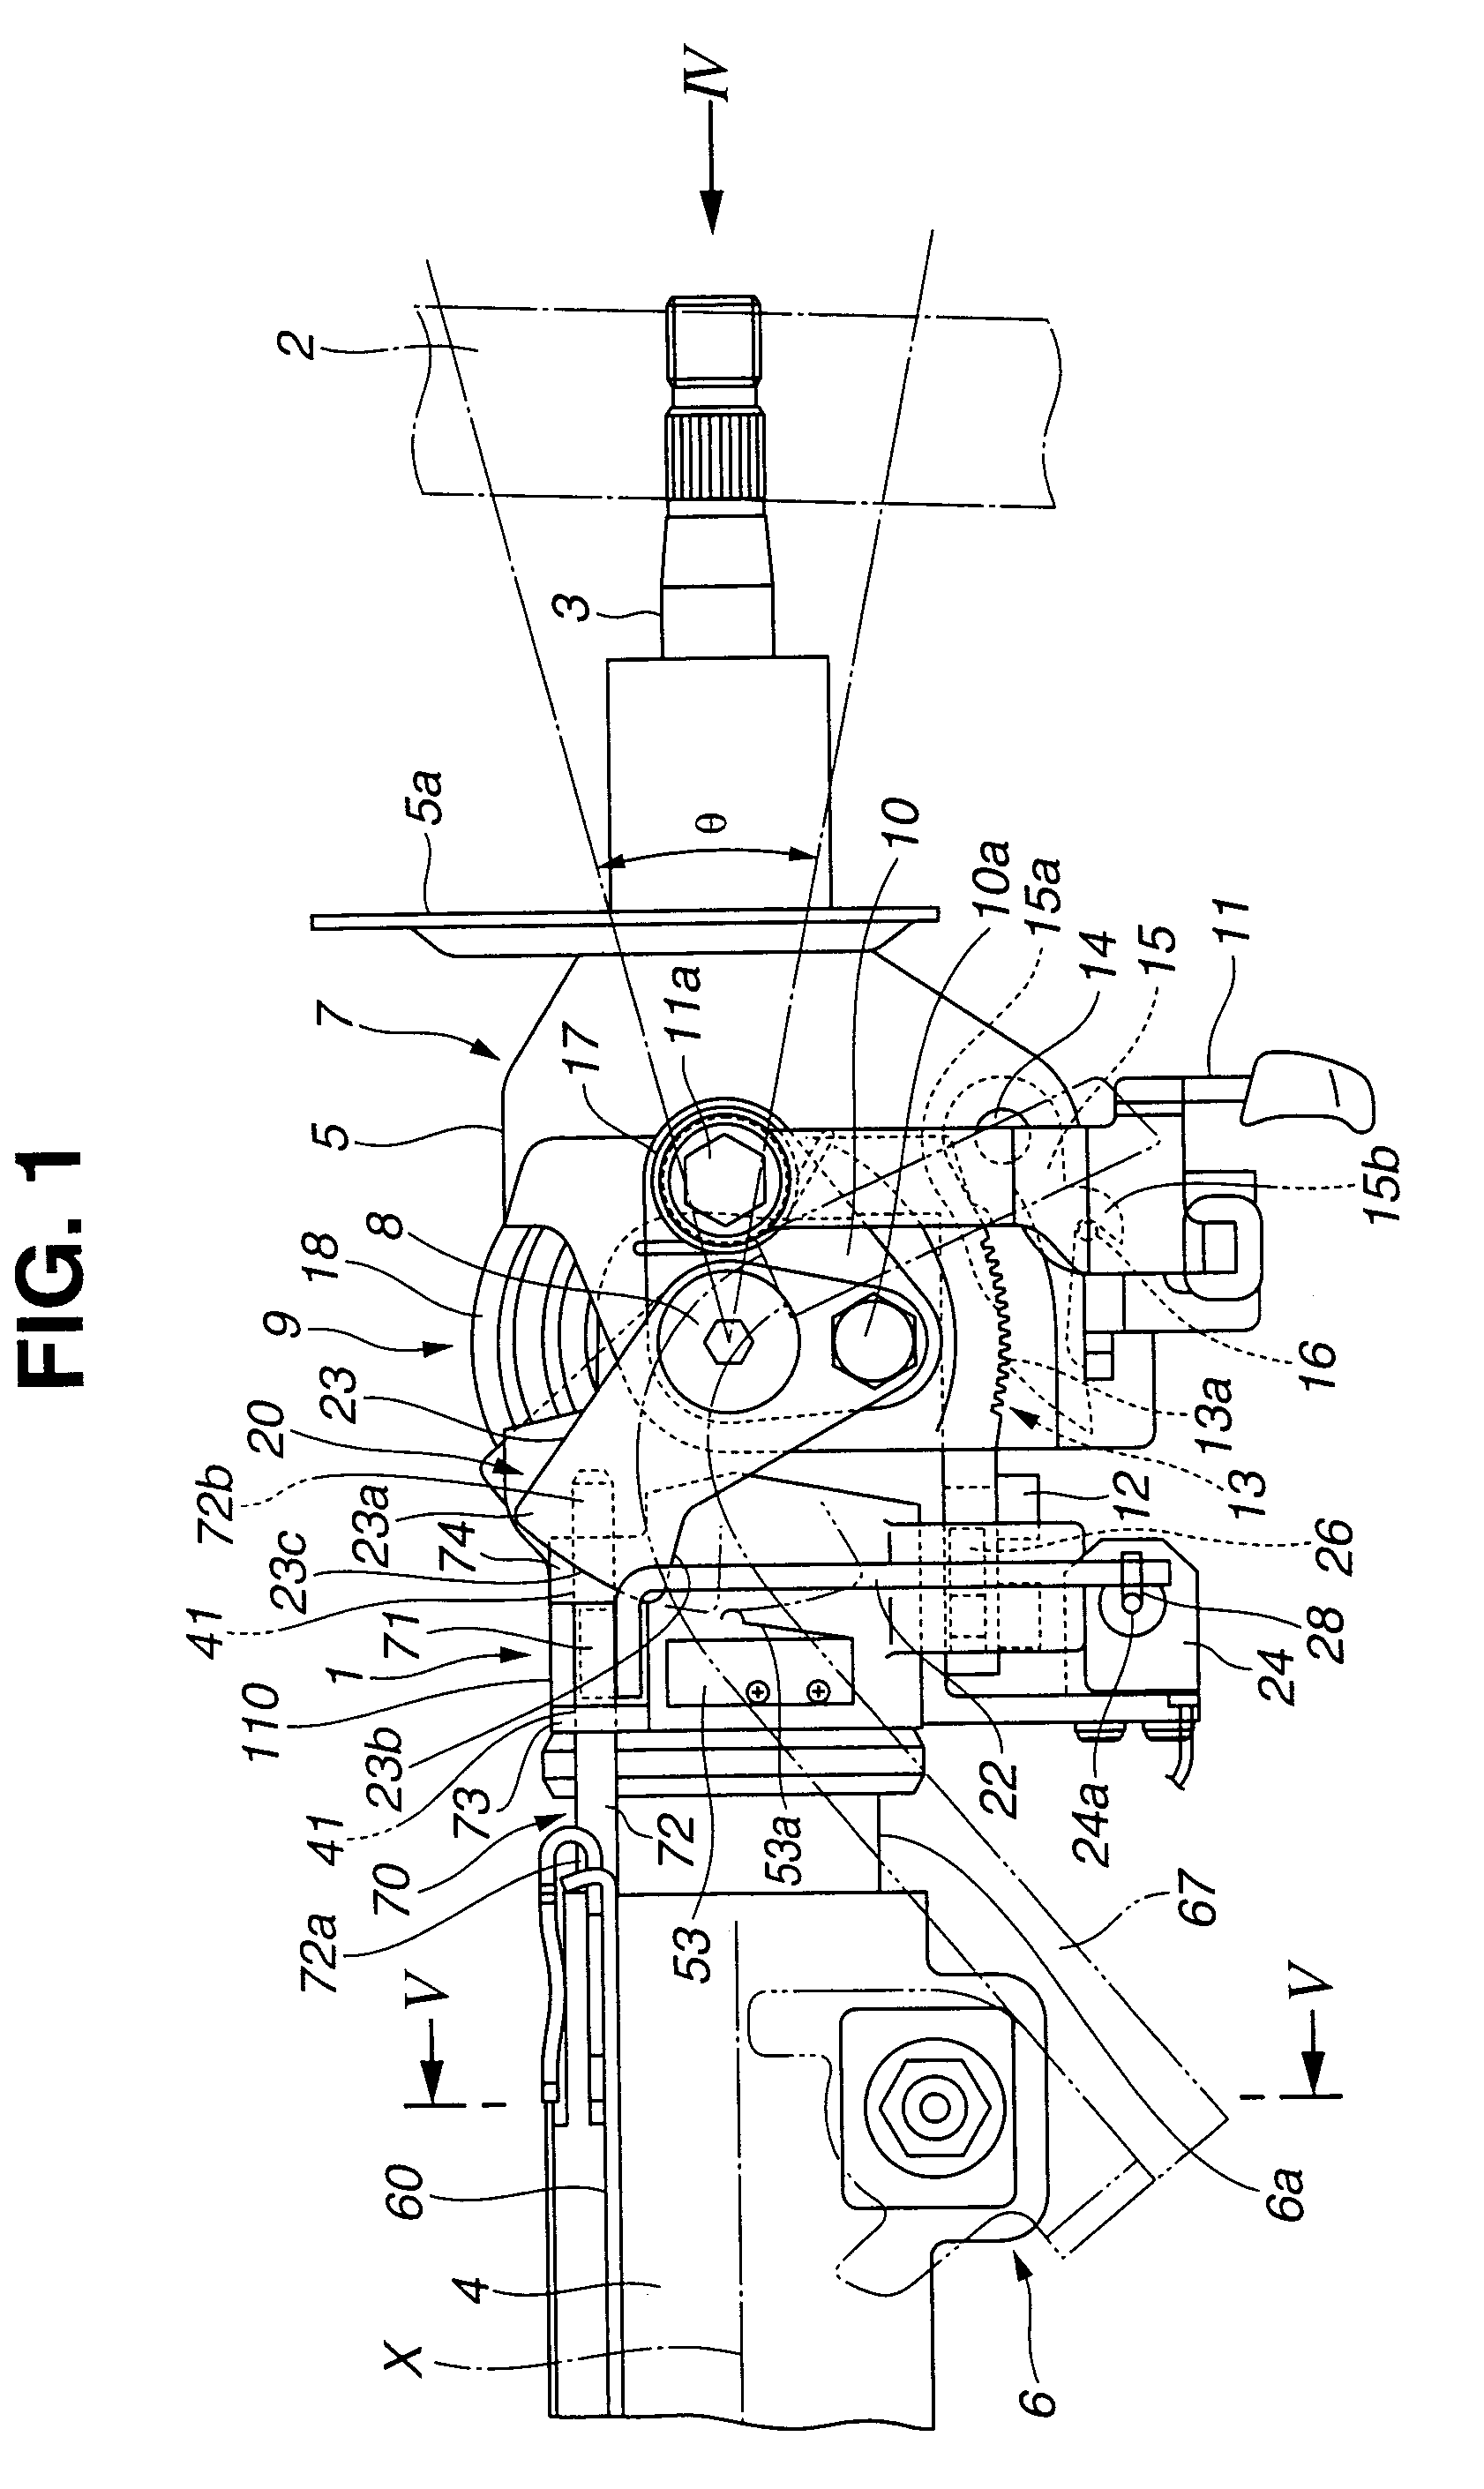 Steering system with tilt control